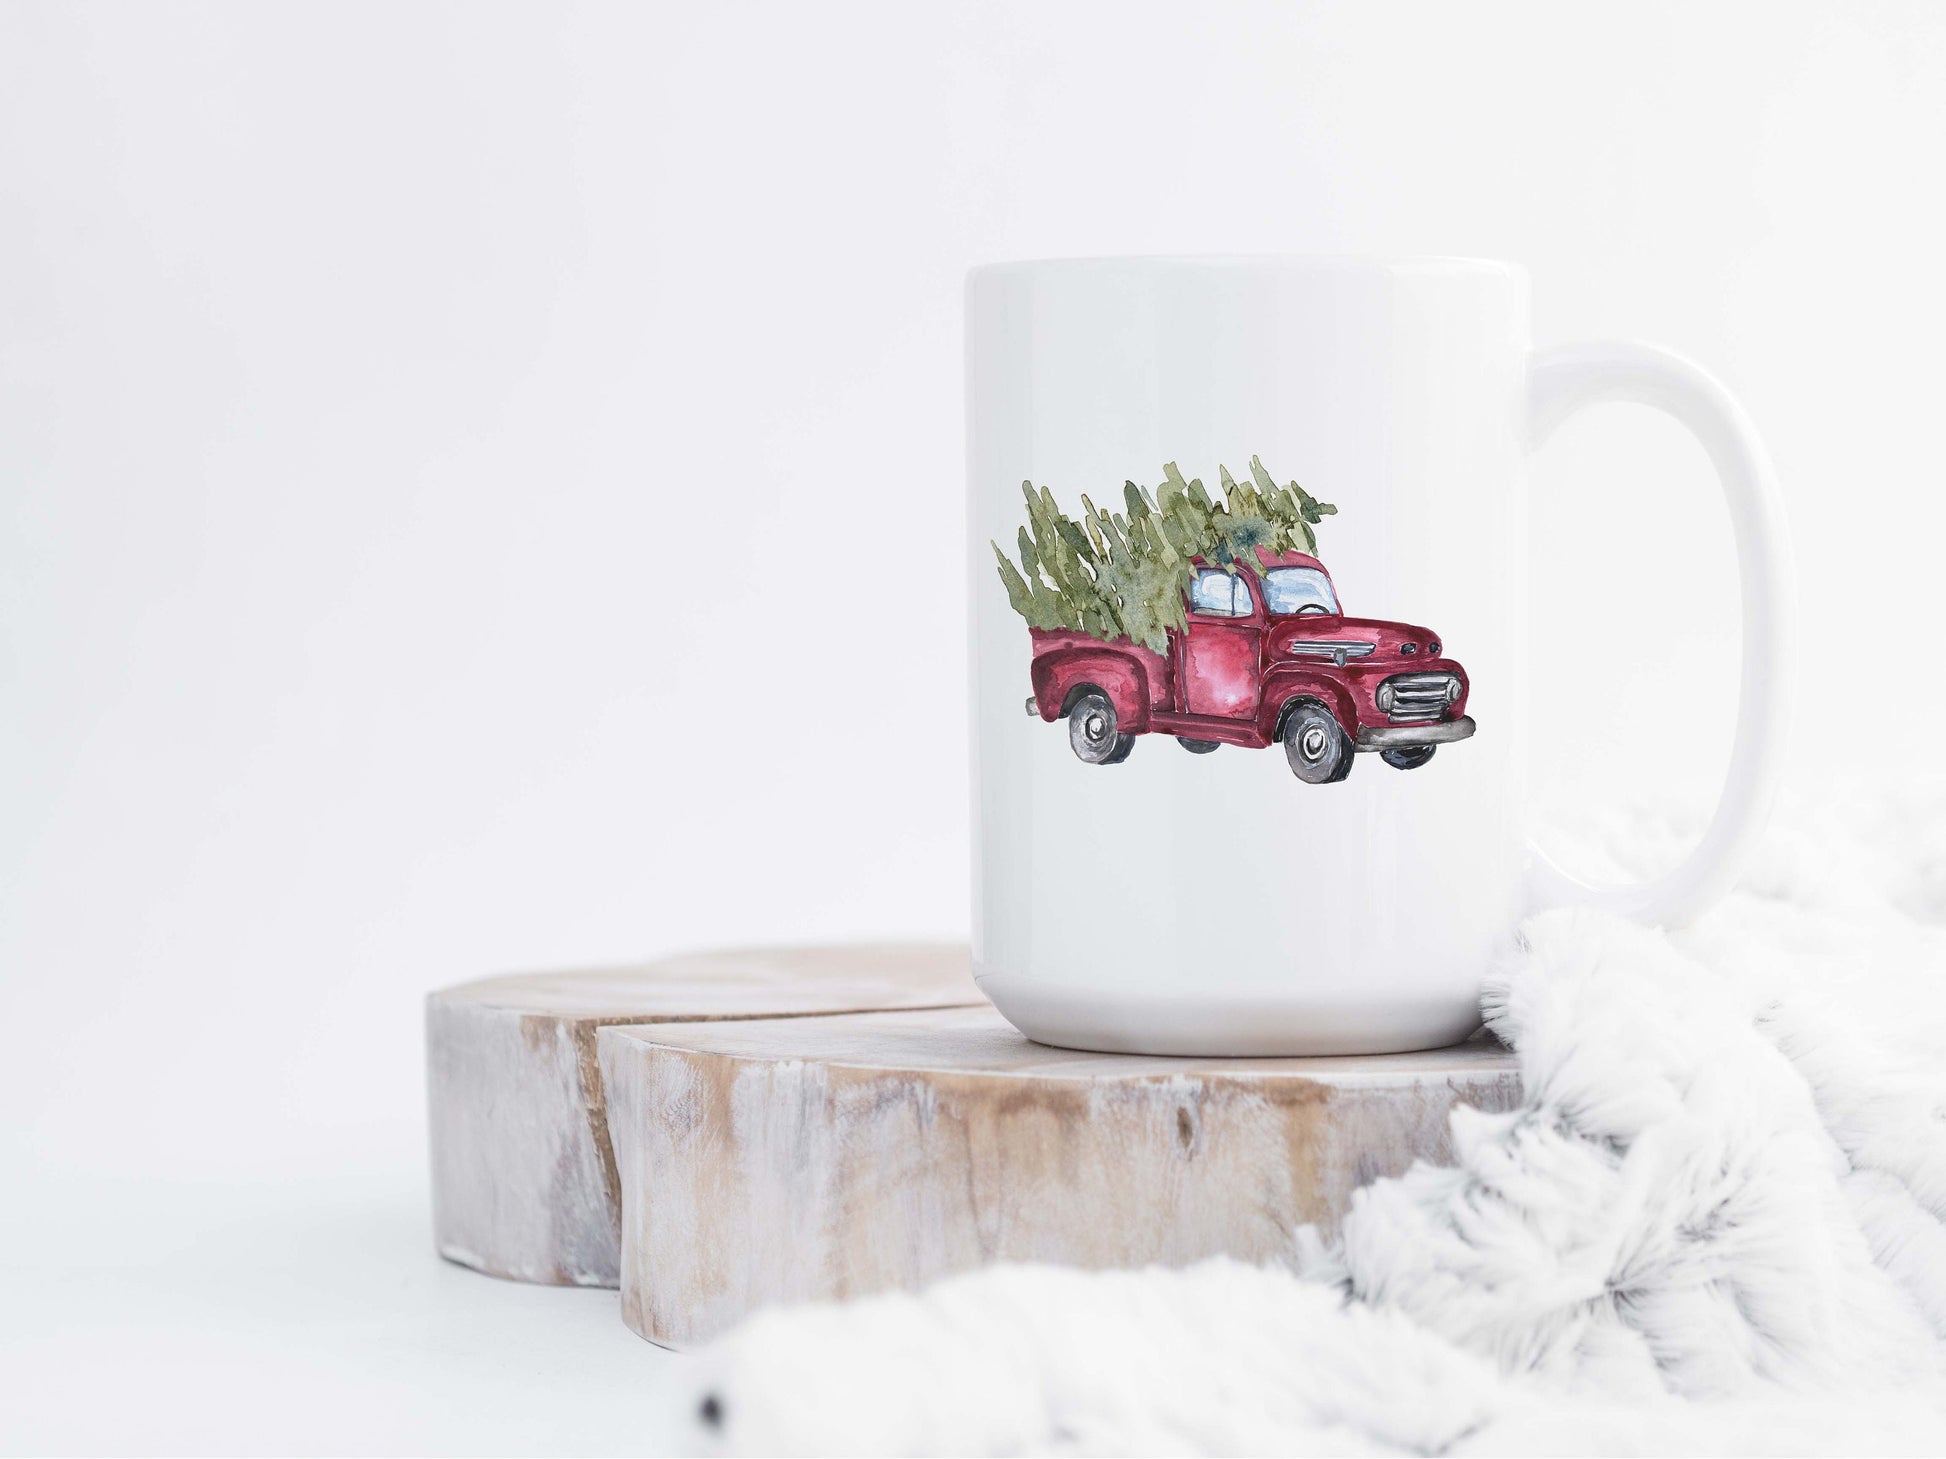 Red Truck With Christmas Trees clipart - Instant Download - Christmas Sublimation Graphic - PNG